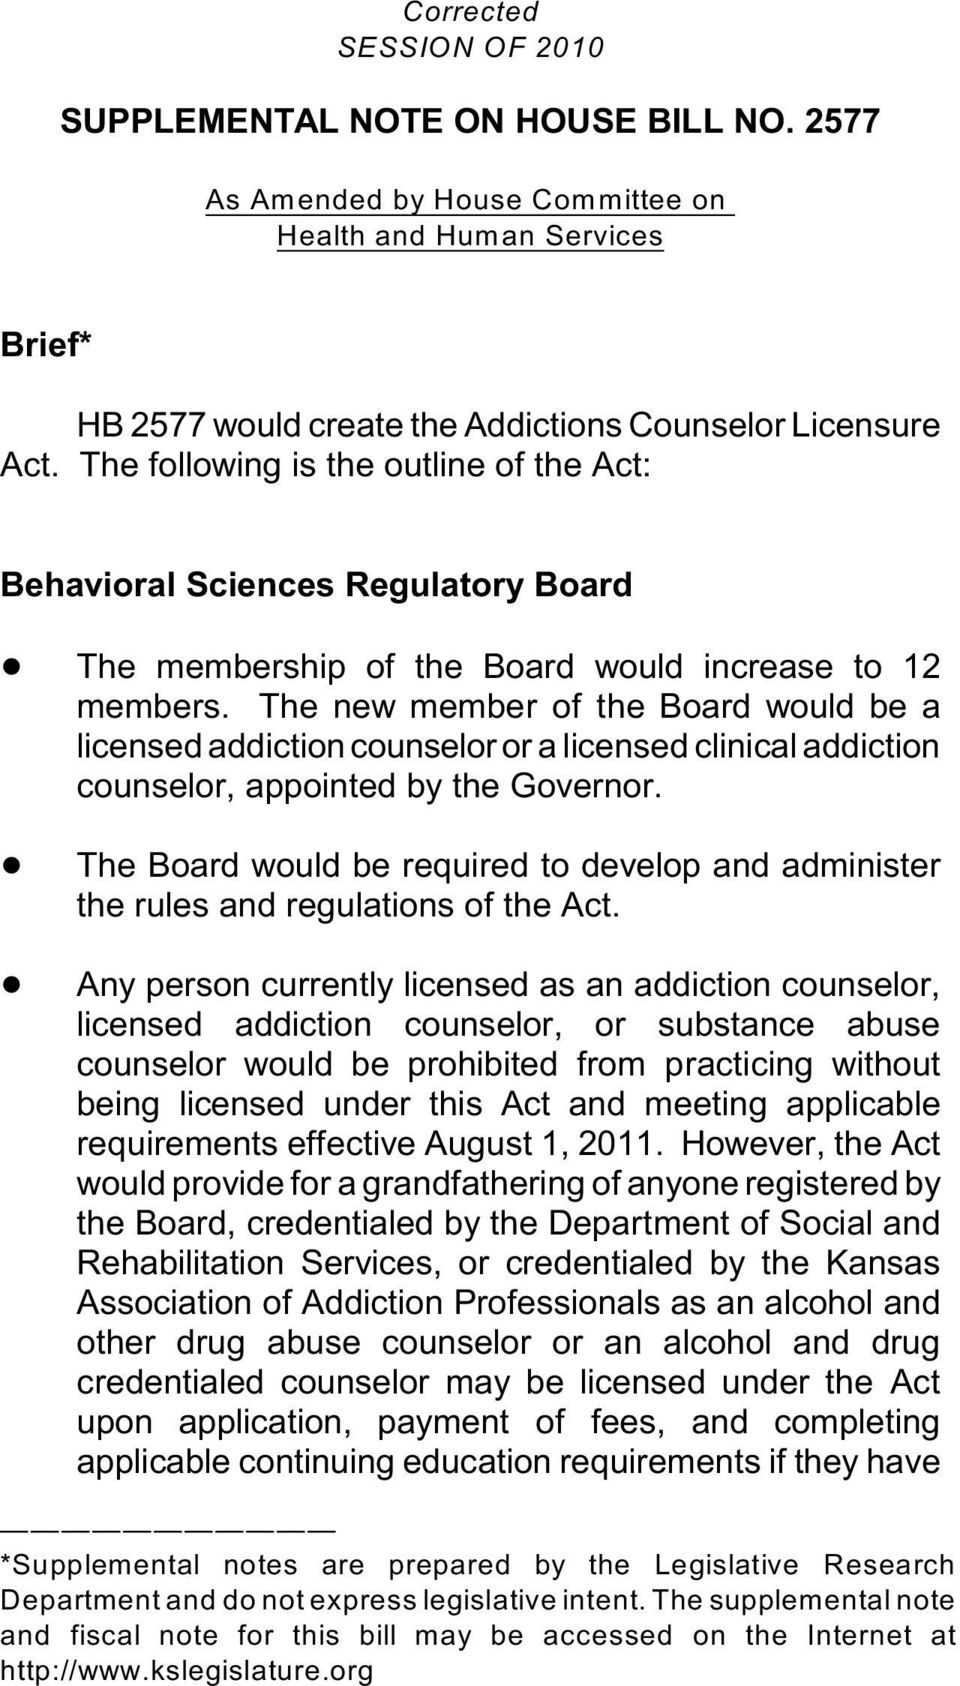 The new member of the Board would be a licensed addiction counselor or a licensed clinical addiction counselor, appointed by the Governor.